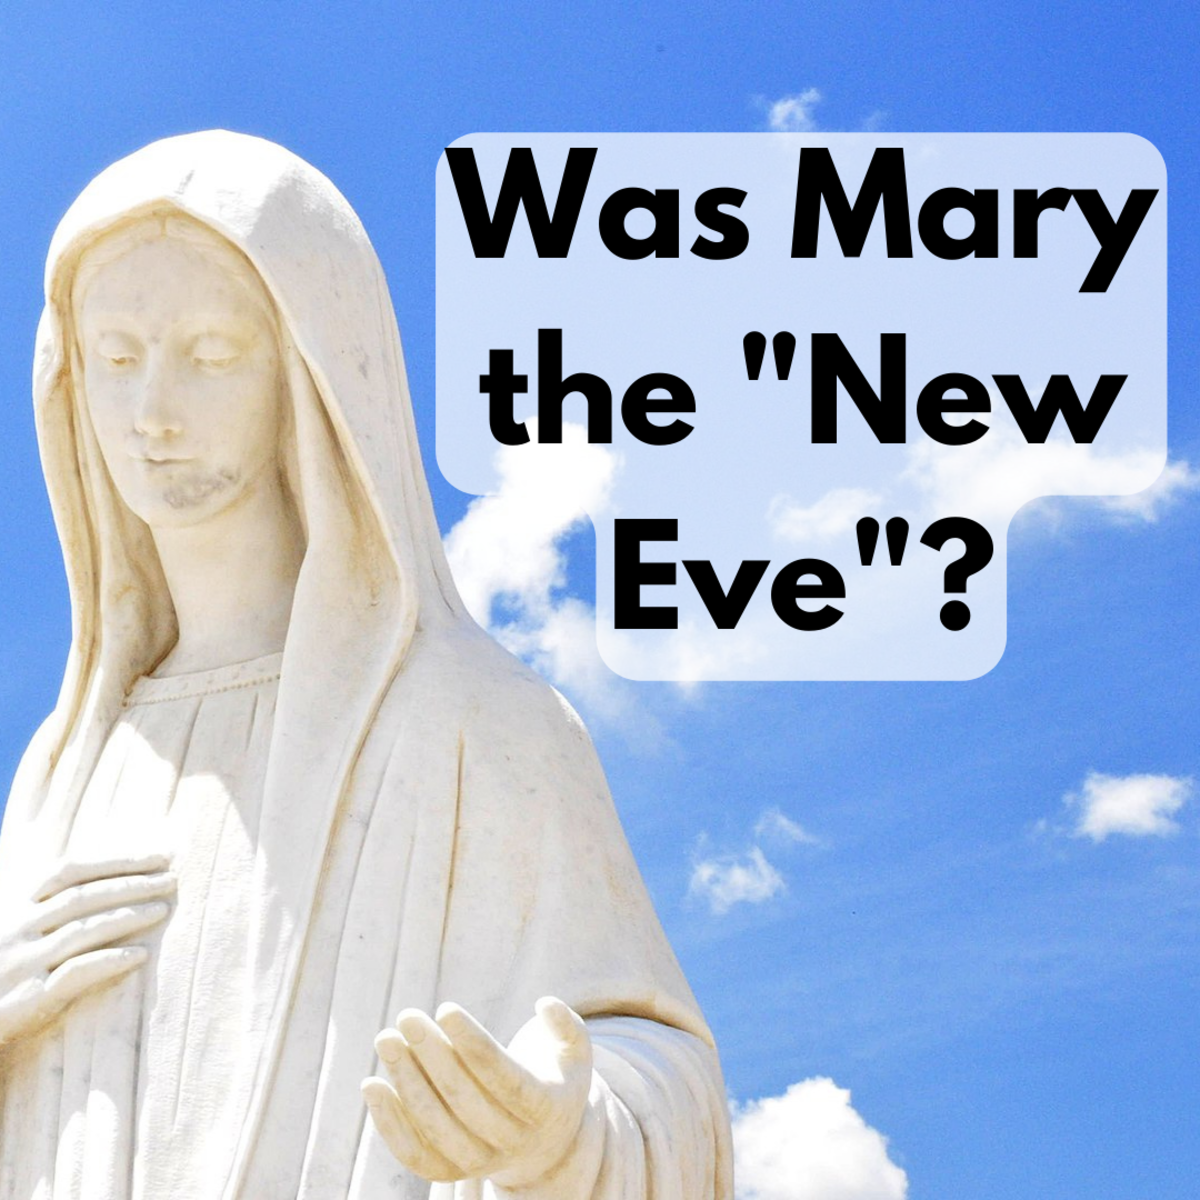 Was Mary the new Eve? Read on to learn all about the concept of the Virgin Mary as the new Eve, as well as the concept's history and its appropriateness.